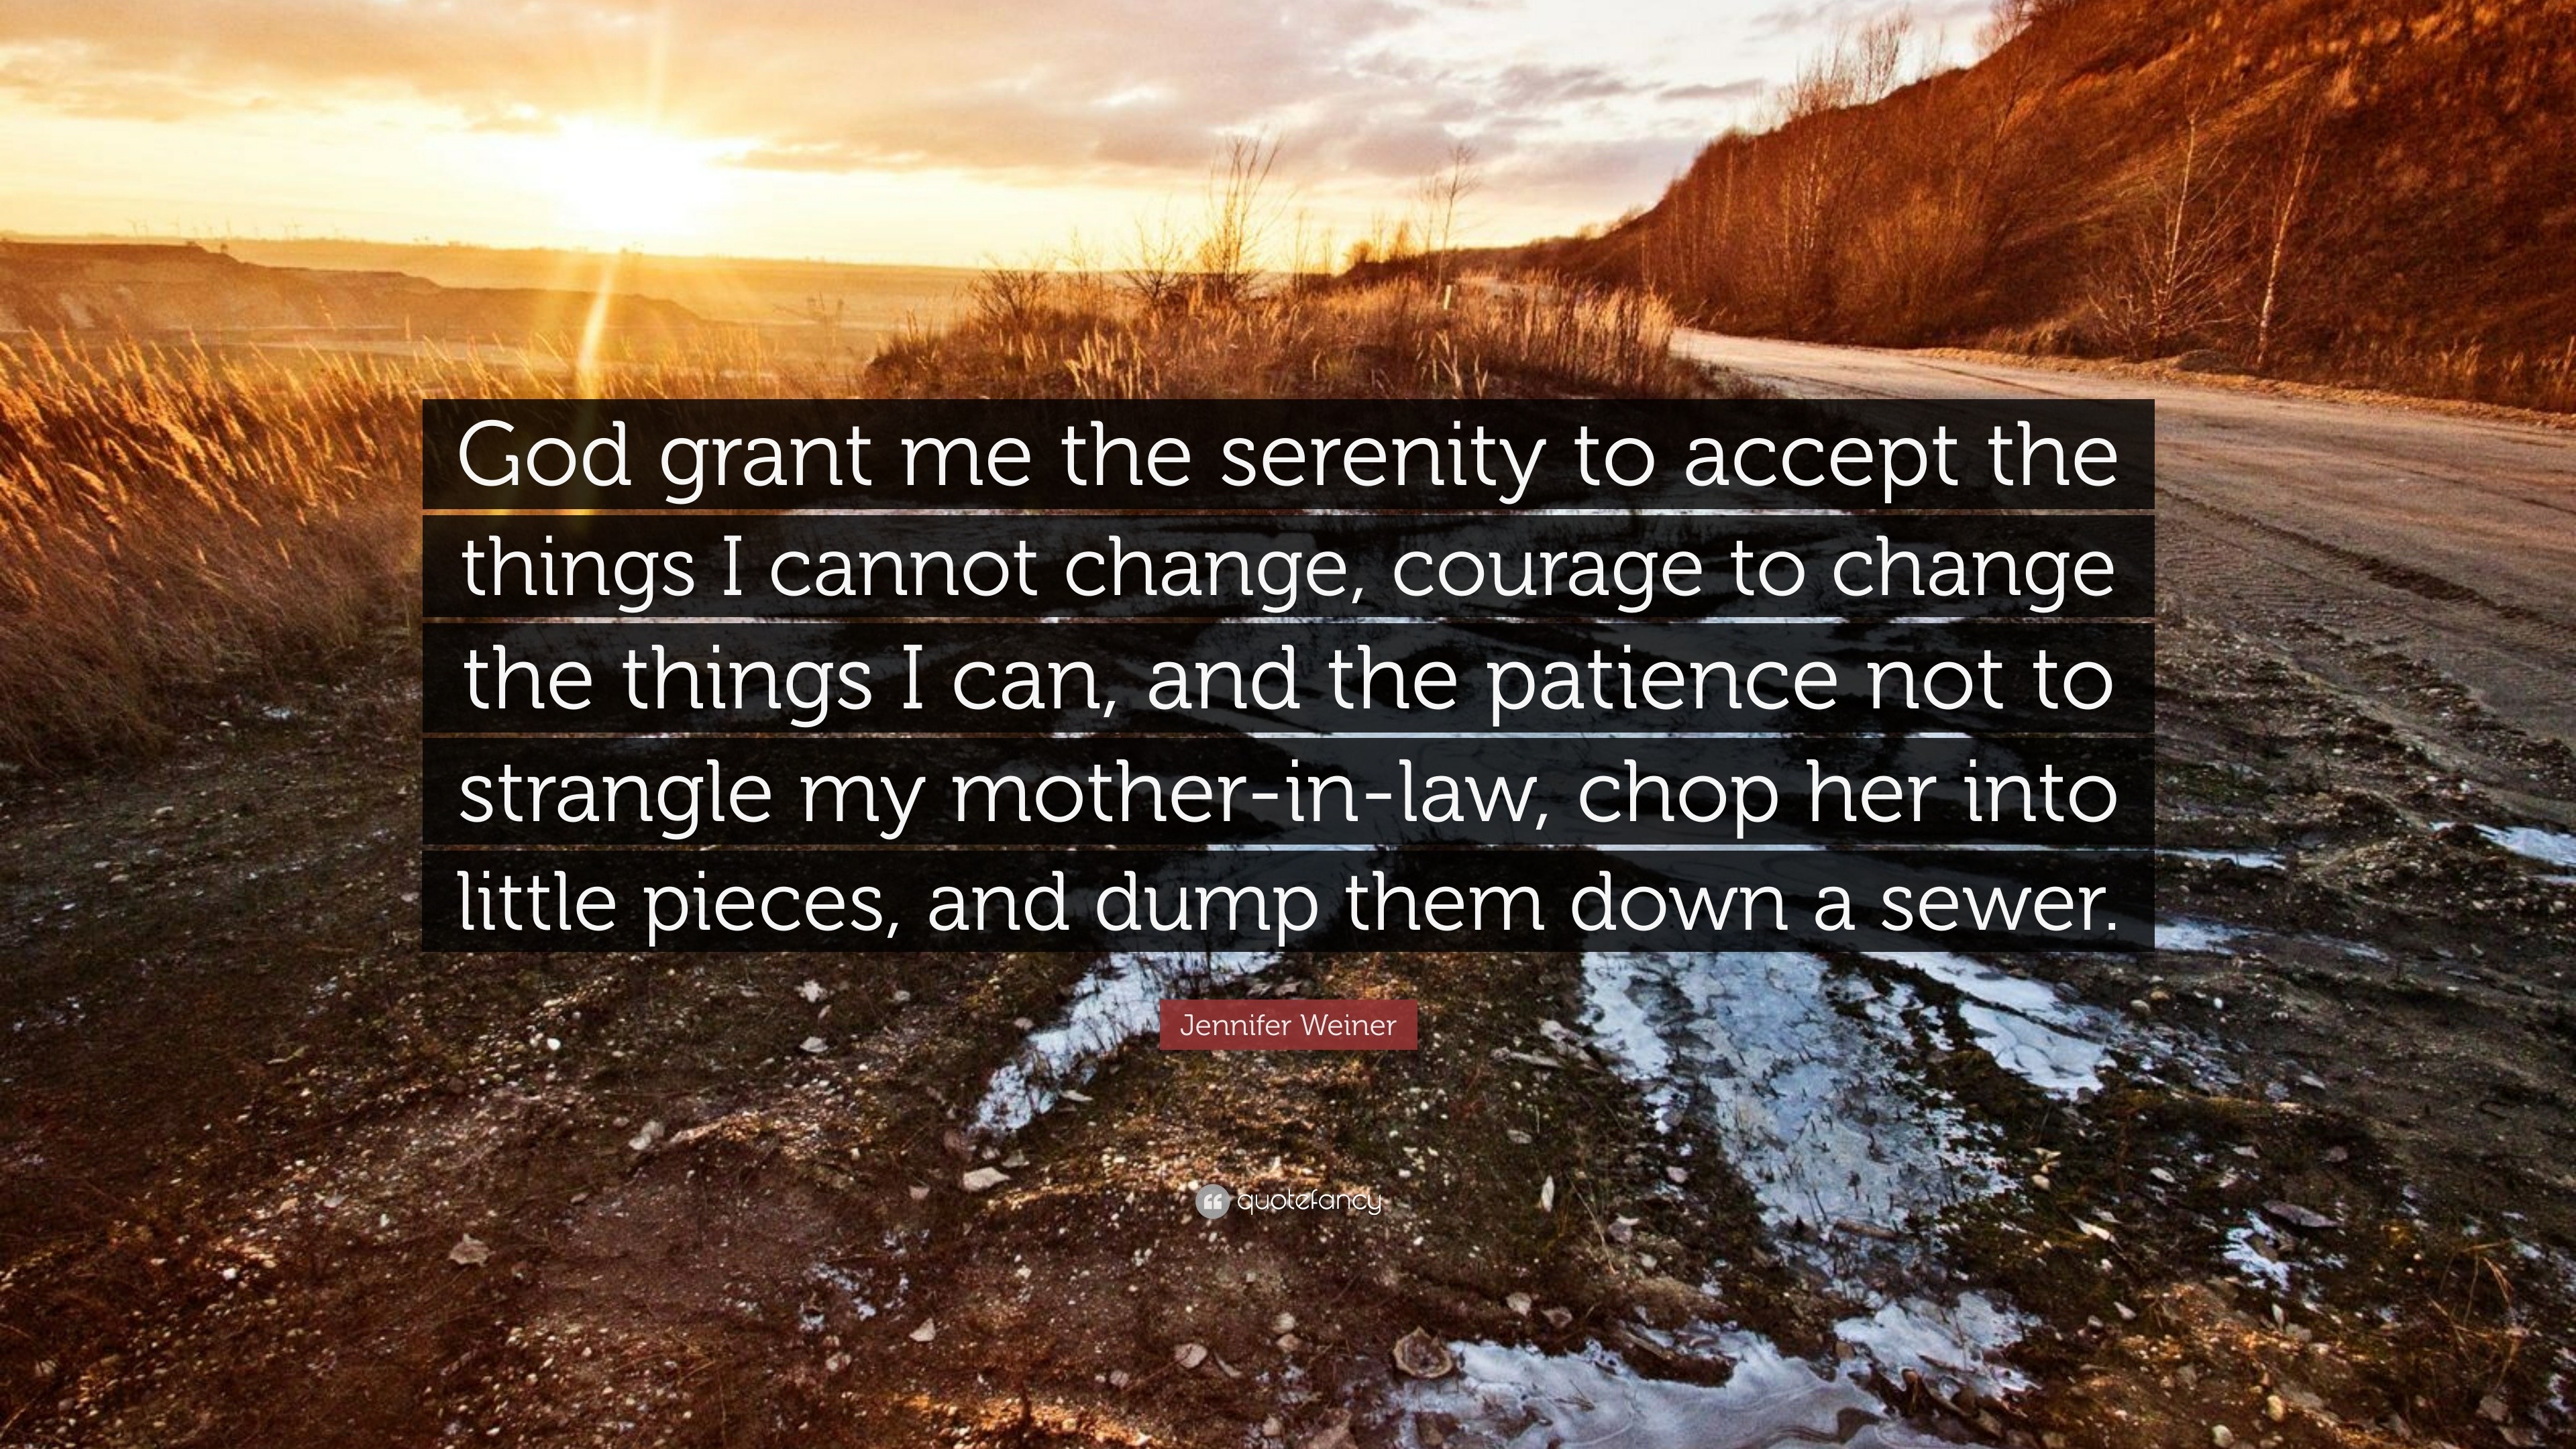 1131175 Jennifer Weiner Quote God grant me the serenity to accept the